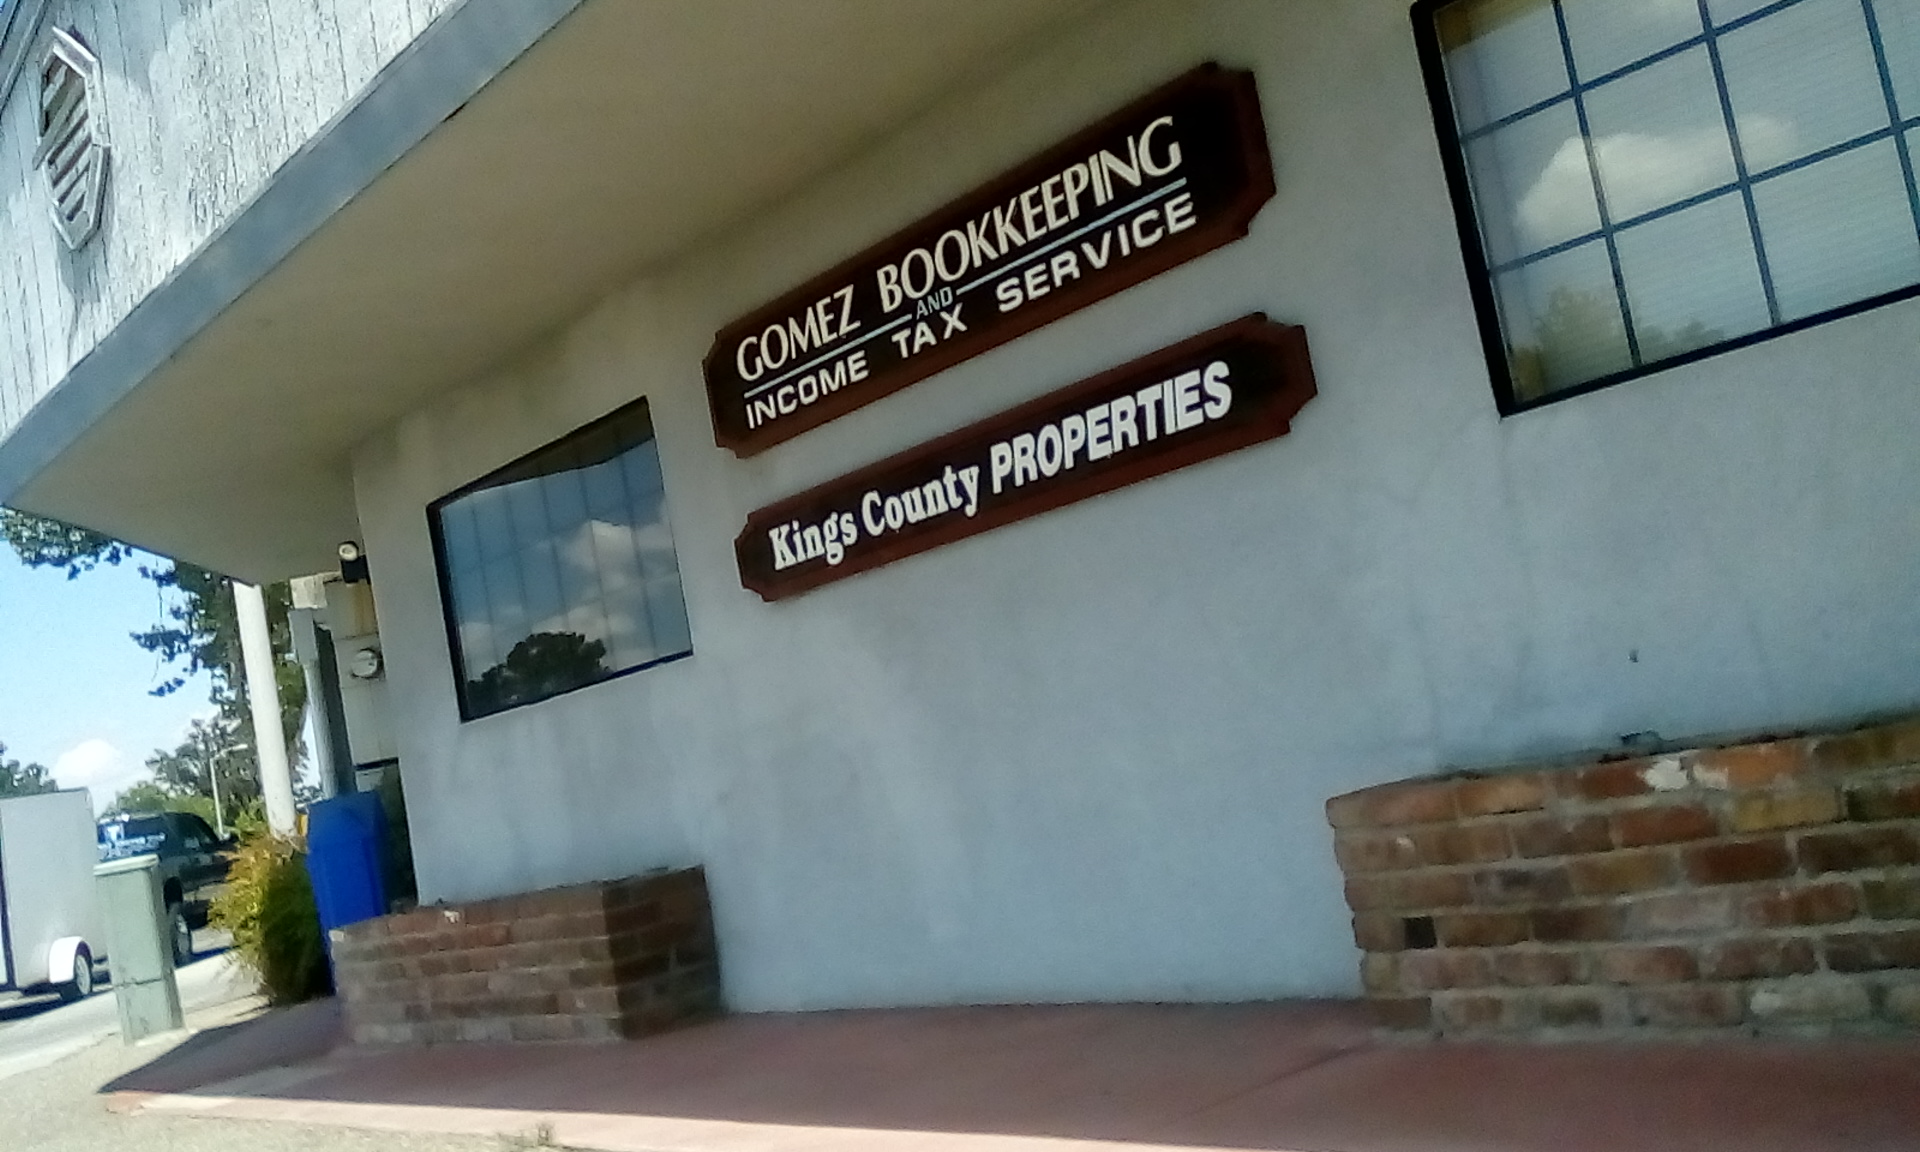 Gomez Bookkeeping & Income Tax